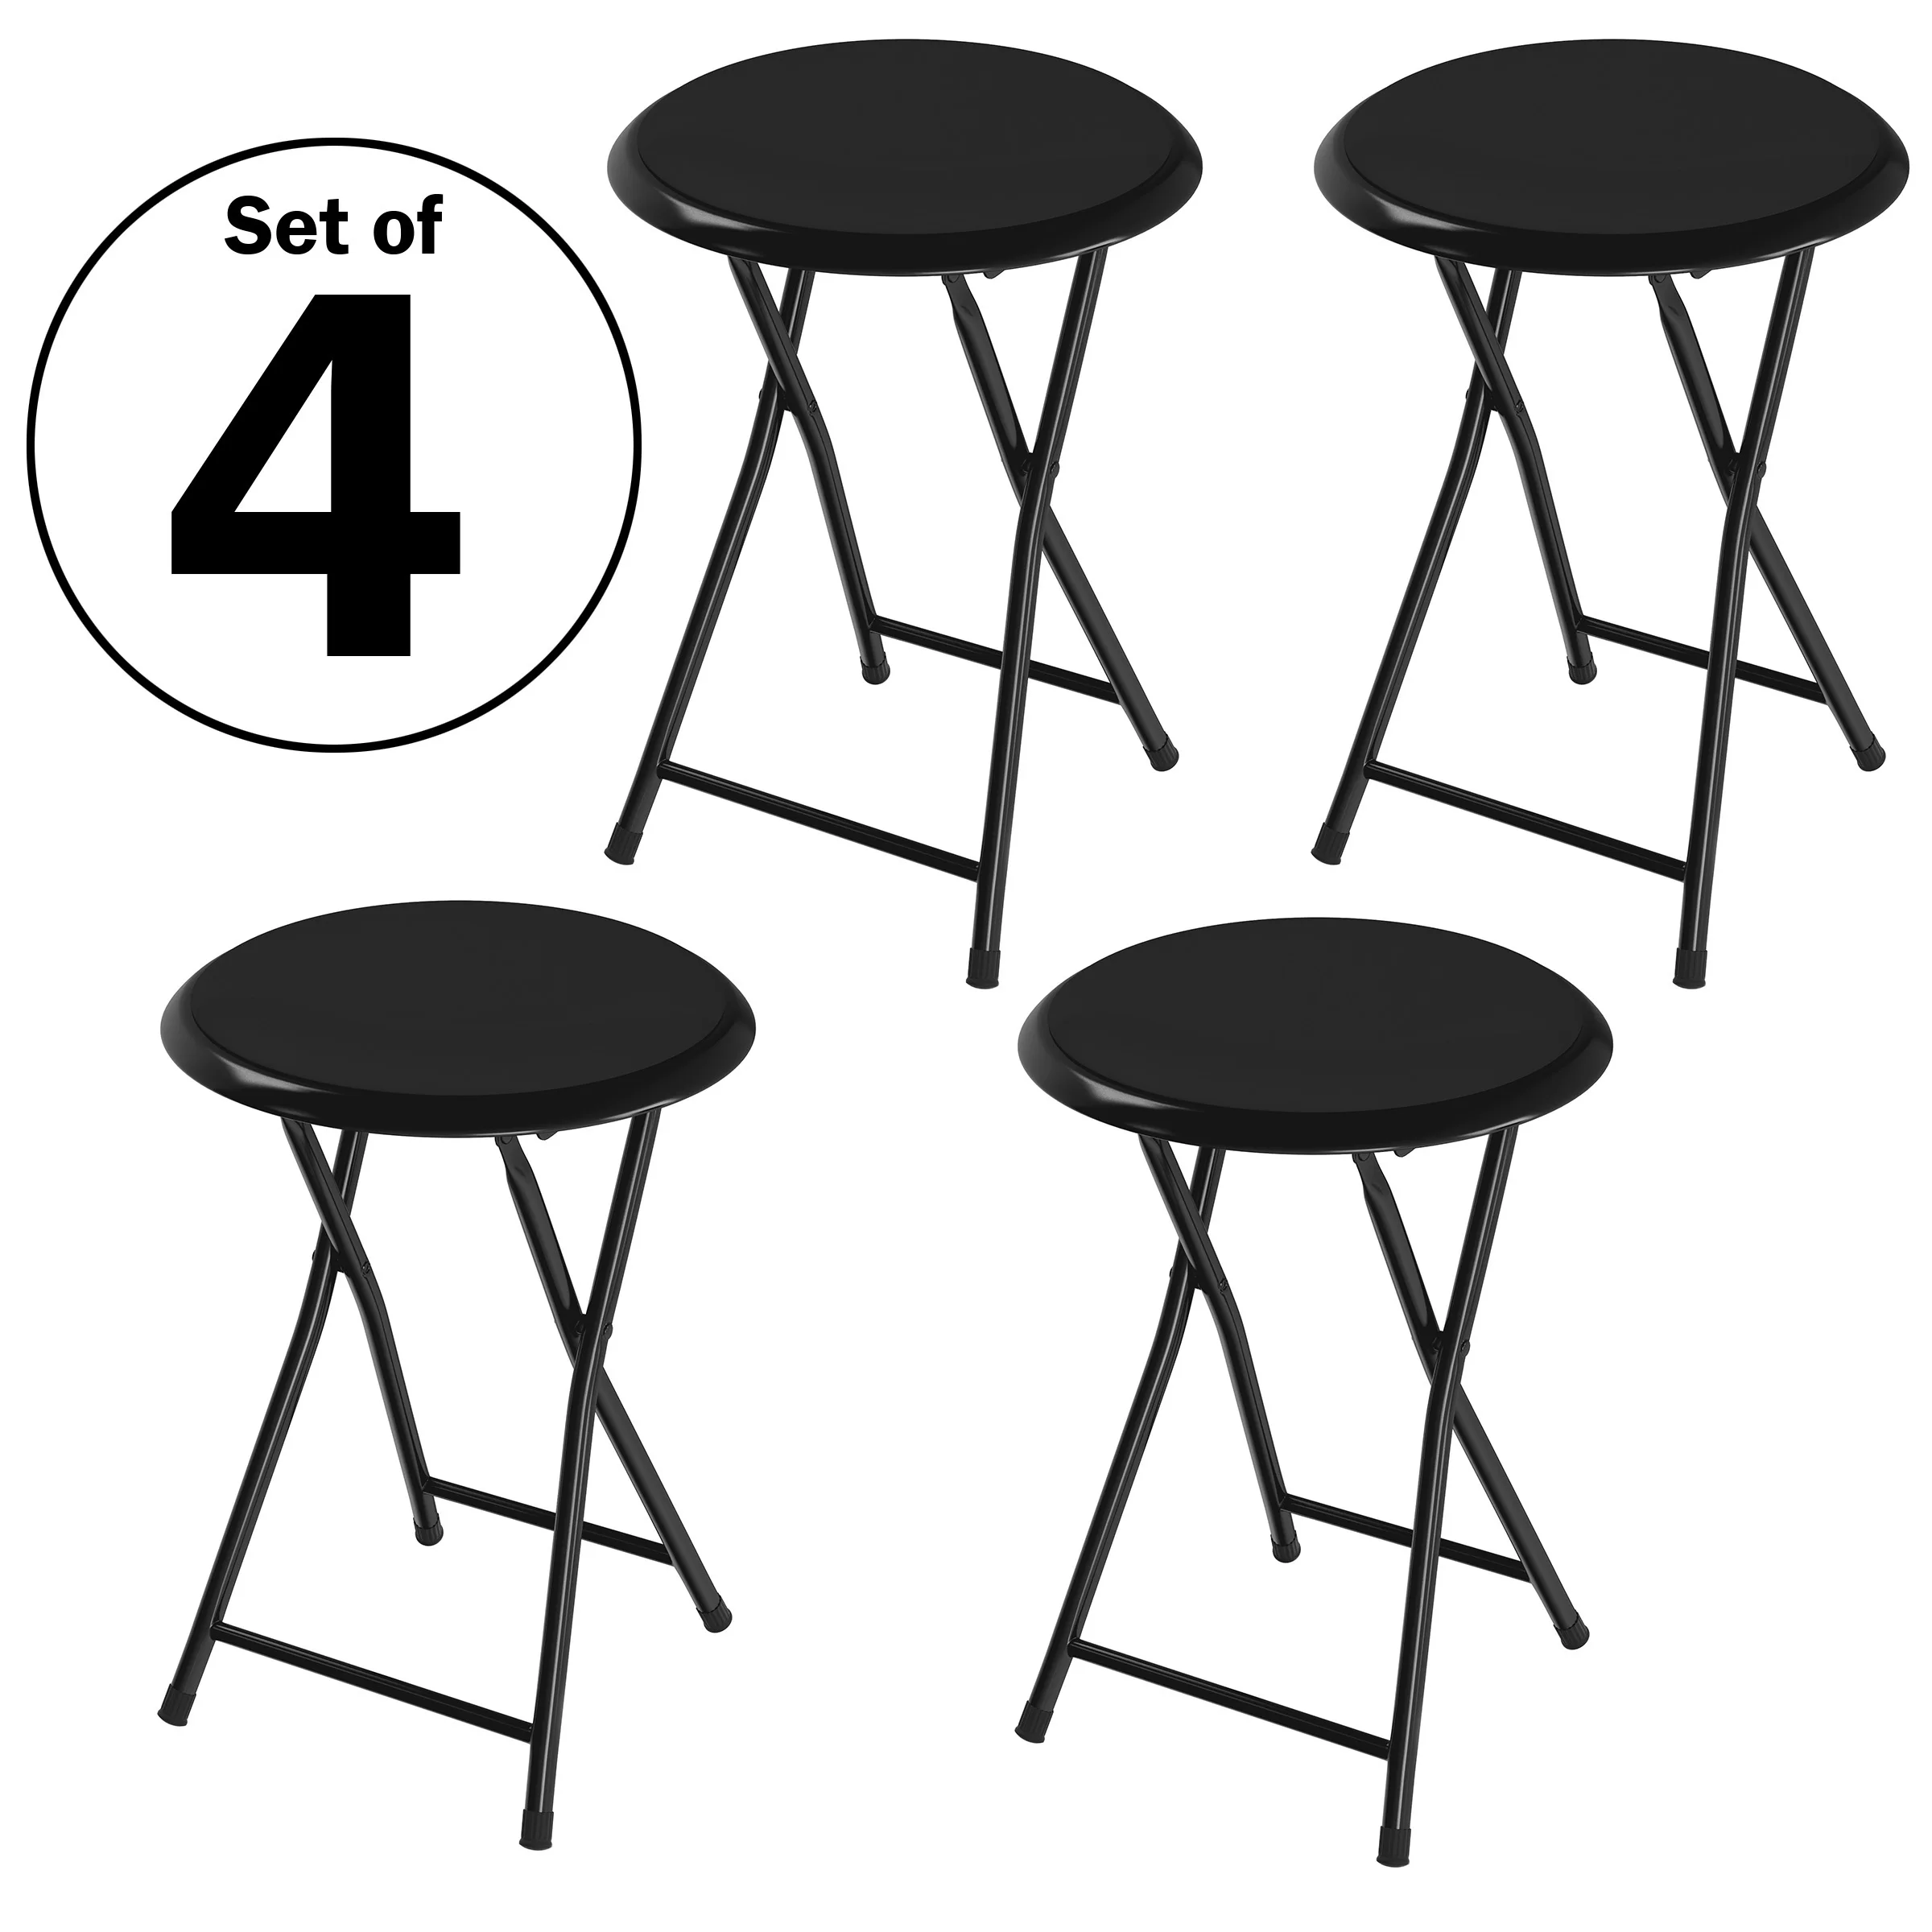 

Folding Bar Stools – Set of 4 Heavy-Duty 18-Inch Stool - 300lb Capacity and Padded Seats for Dorm, Recreation or Game Room by